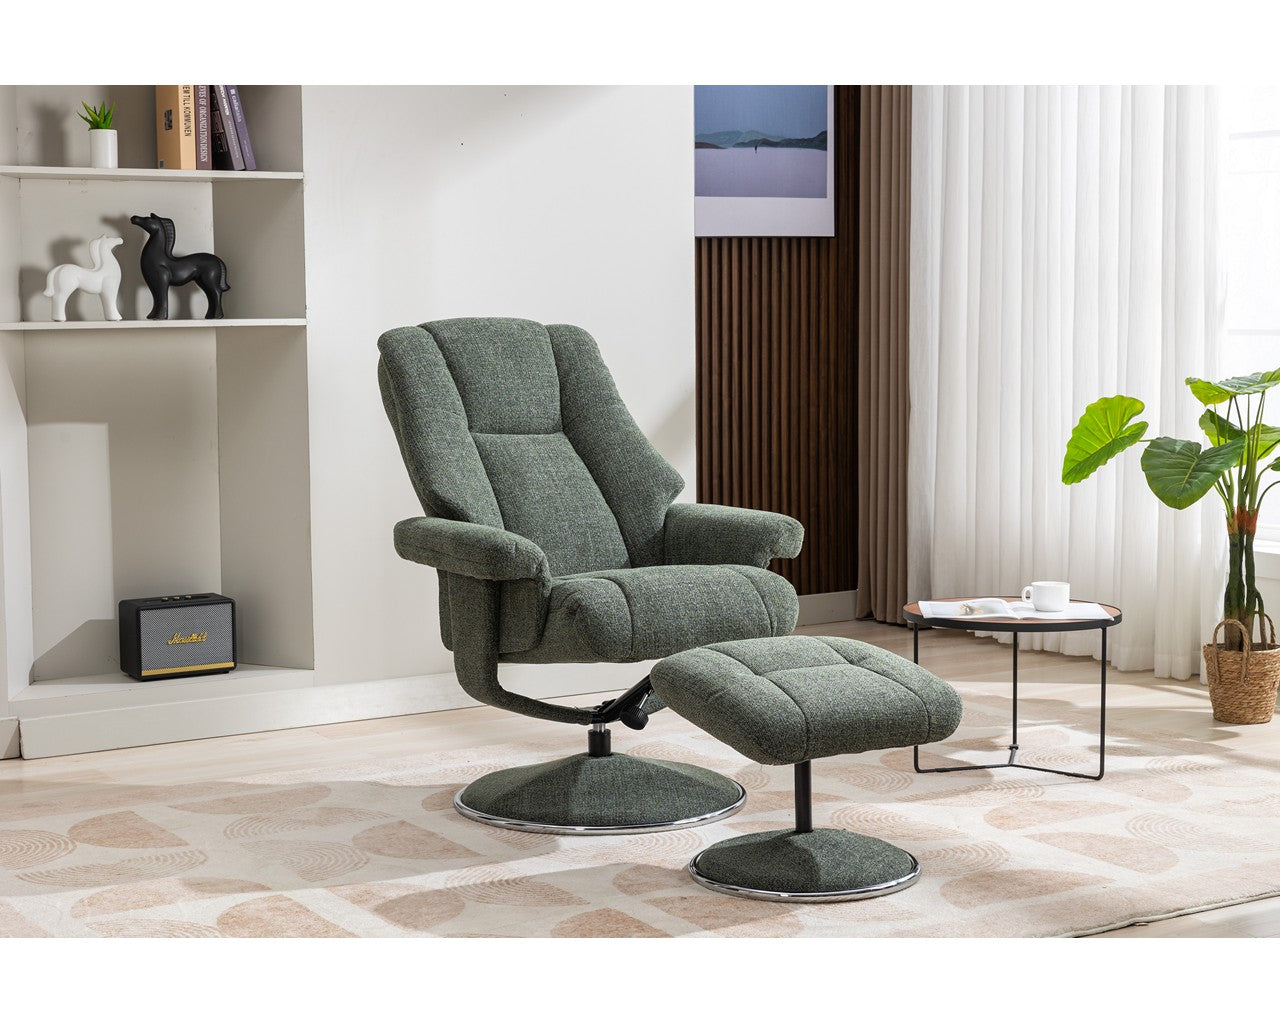 Swivel Recliner Chair Collection - Denver: Chacha Fern